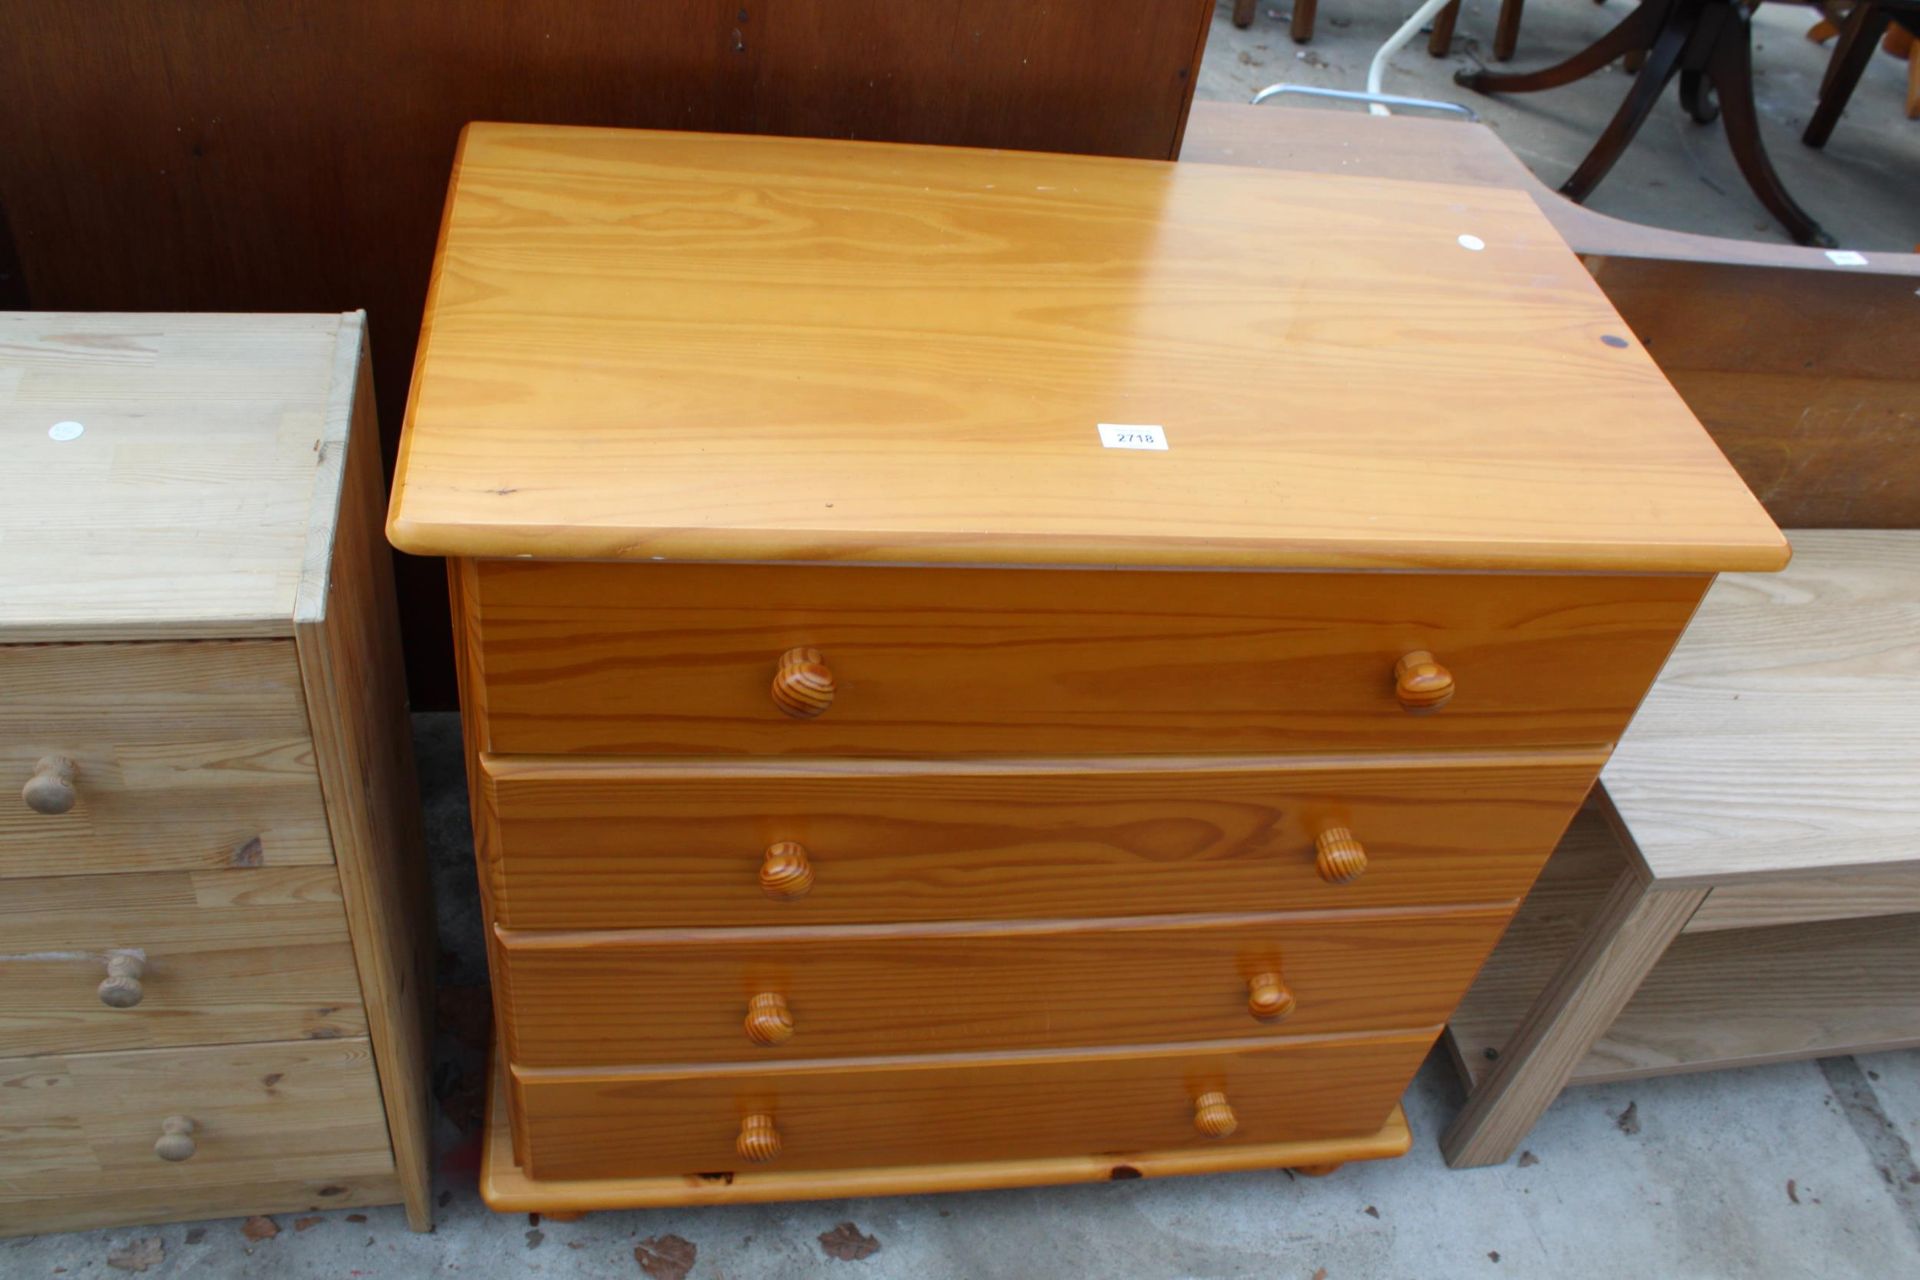 A MODERN PINE CHEST OF FOUR DRAWERS, 32" WIDE